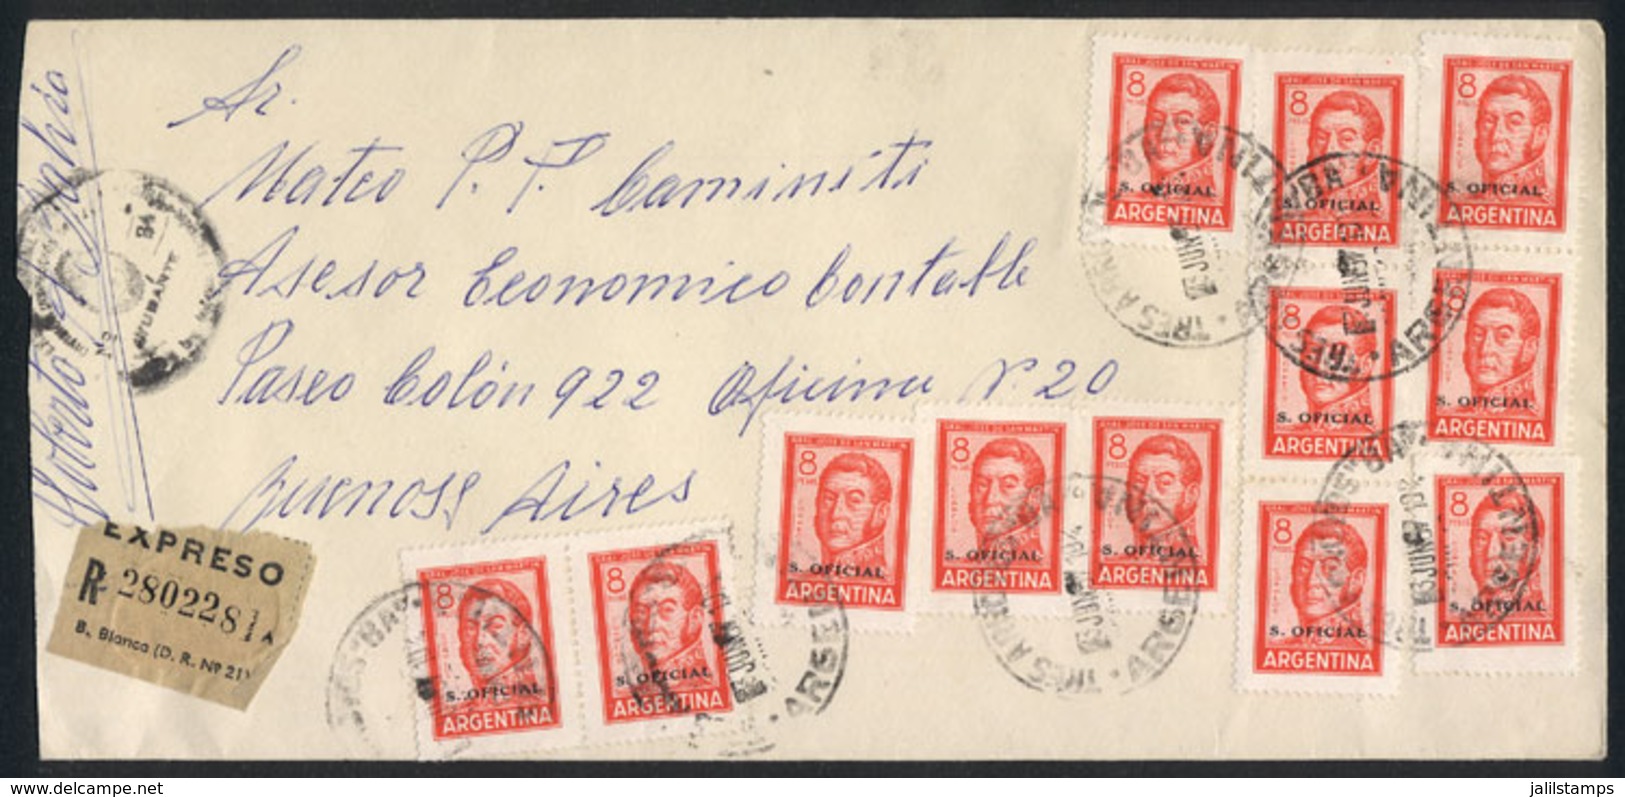 ARGENTINA: Registered Cover Franked By GJ.750 X12, Sent From Tres Arroyos To Buenos Aires On 3/JUN/1967, VF, Rare Multip - Dienstmarken